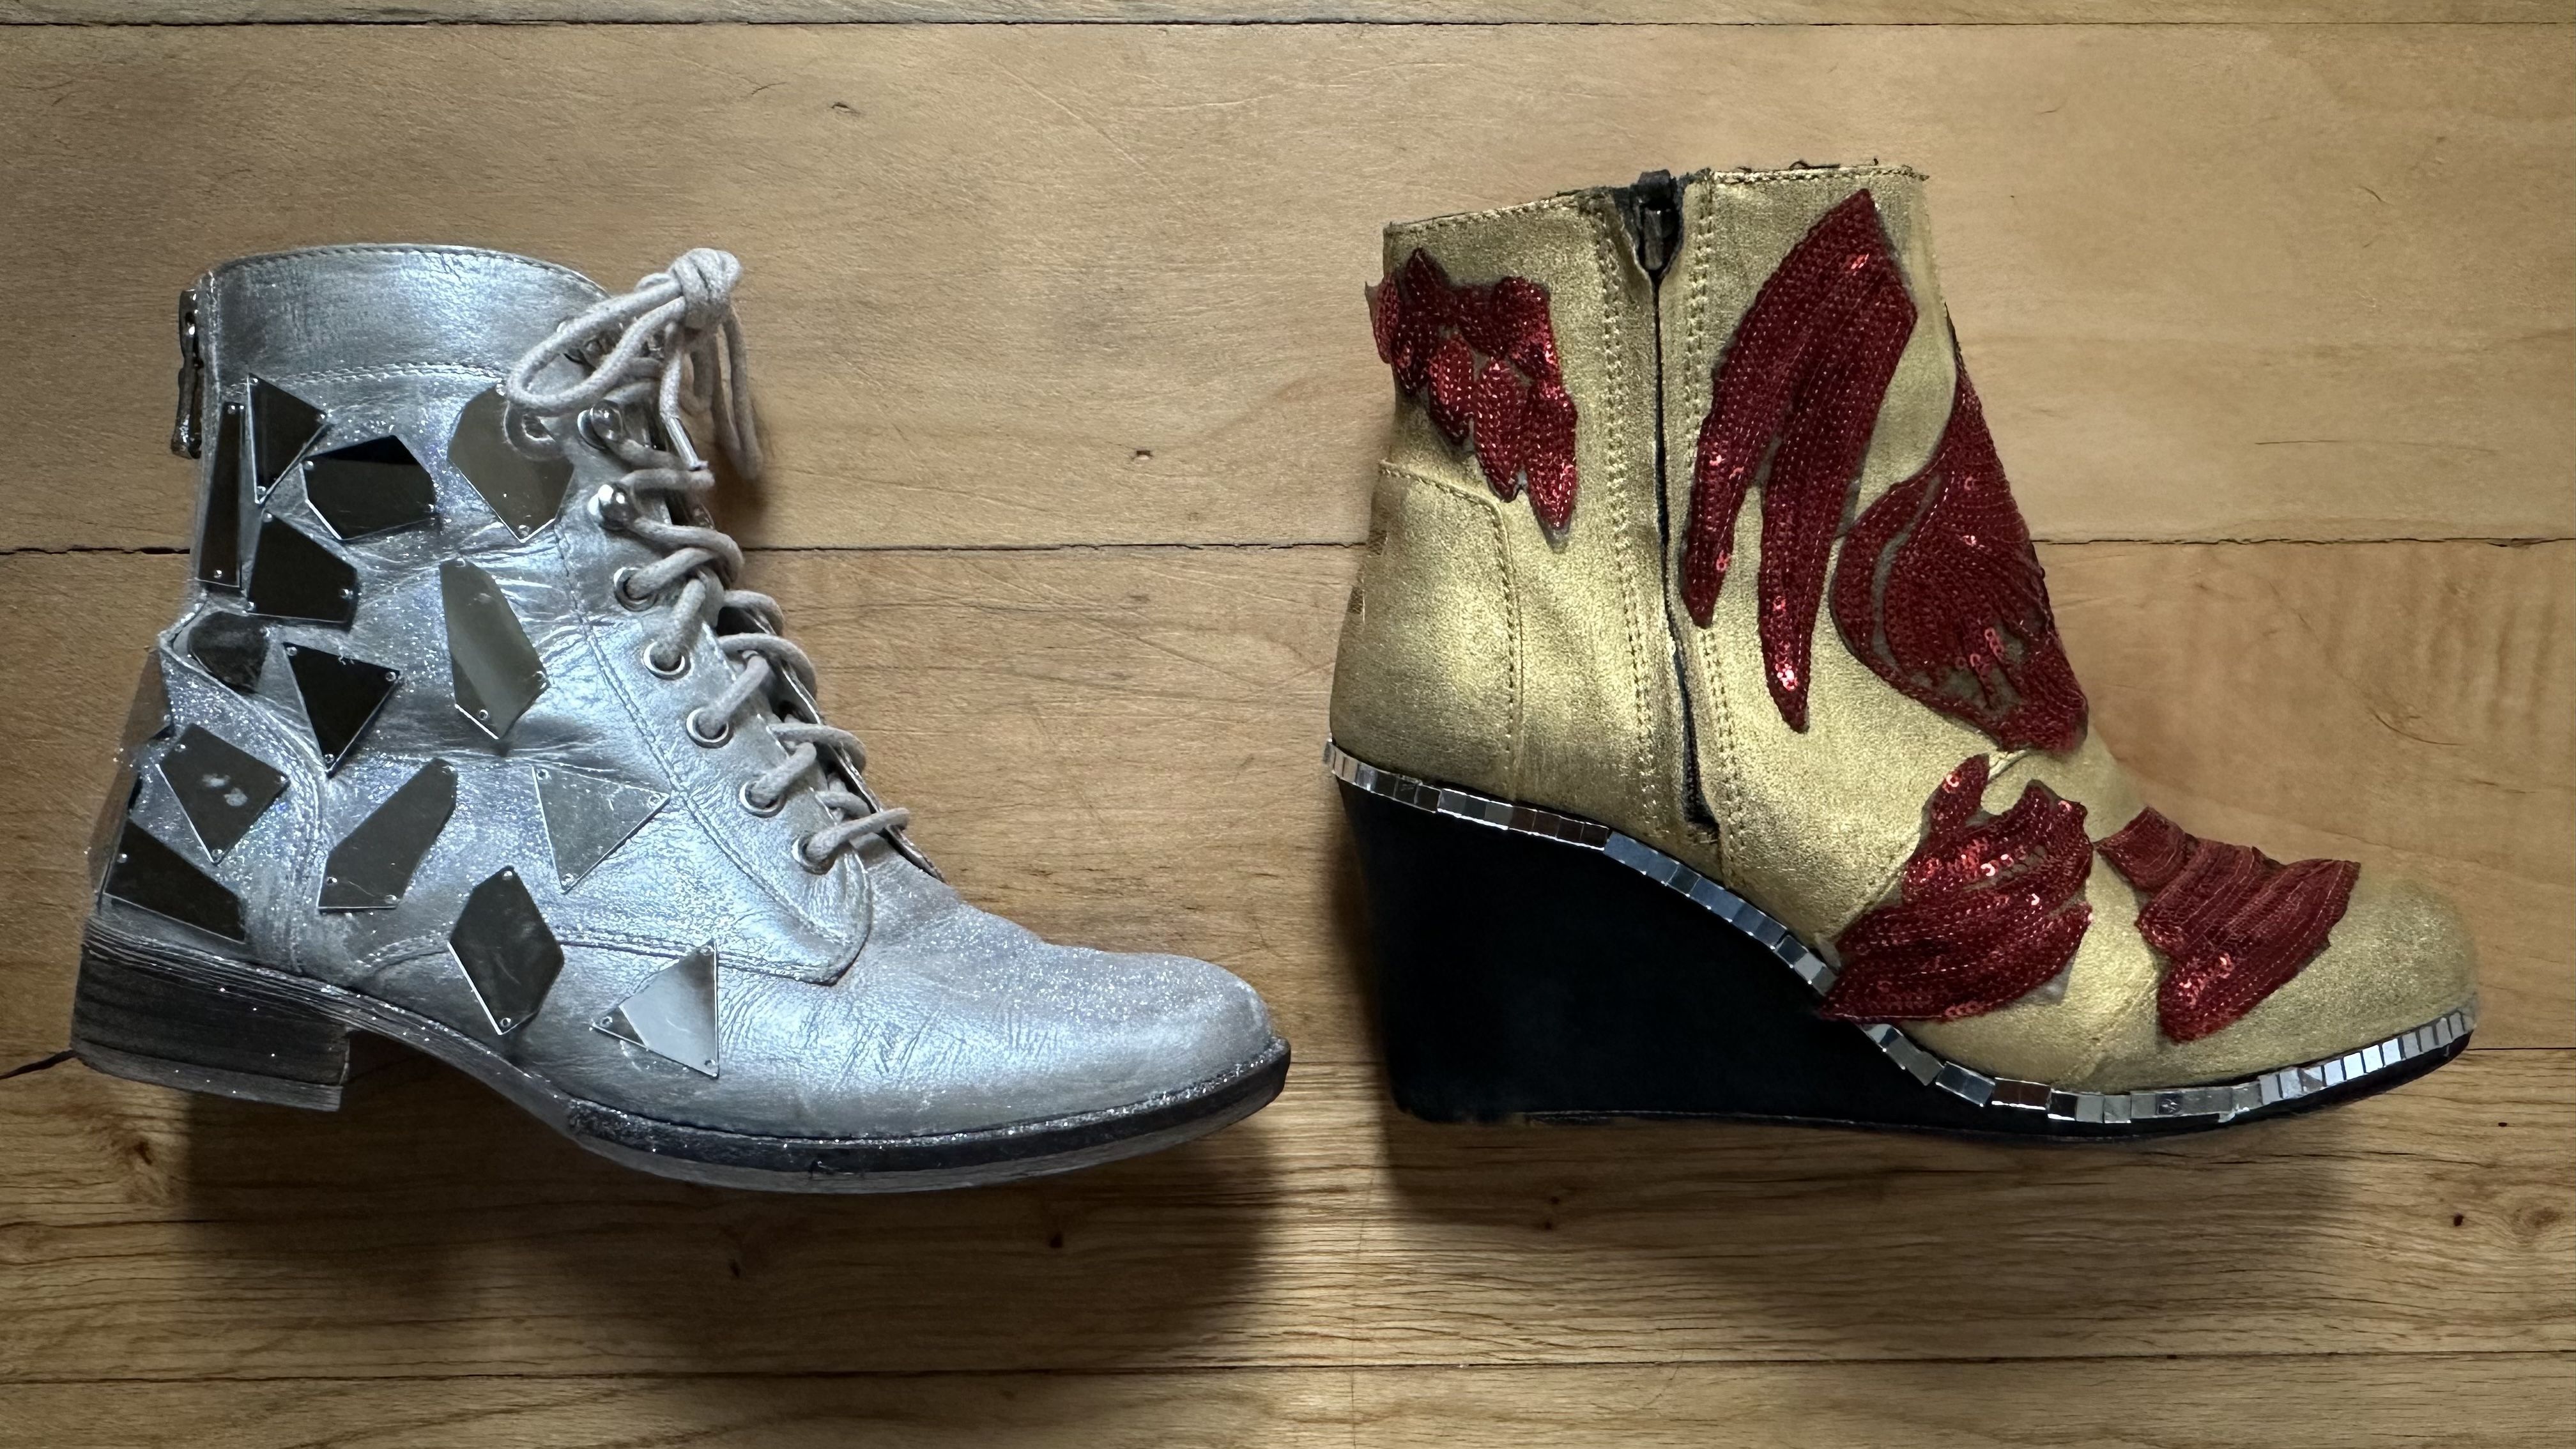 A silver lace-up boot embellished with mirrored pieces lays on the ground next to a gold-painted boot covered in sequin patches shaped like red feathers.